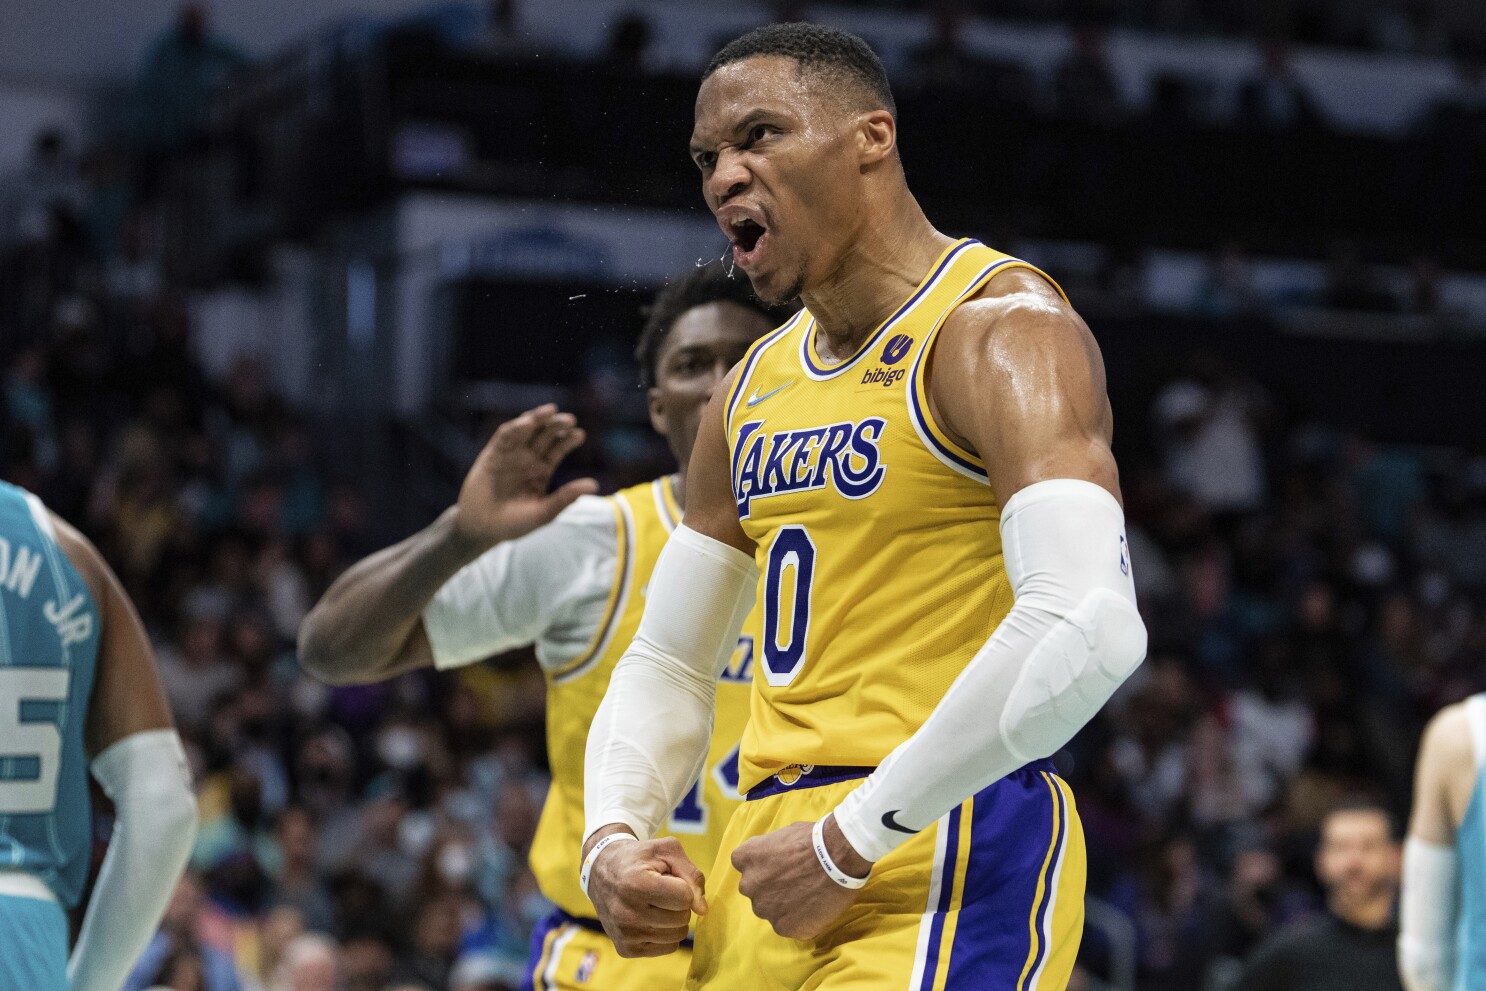 Russell Westbrook and the Lakers look to repair their season - Los Angeles Times